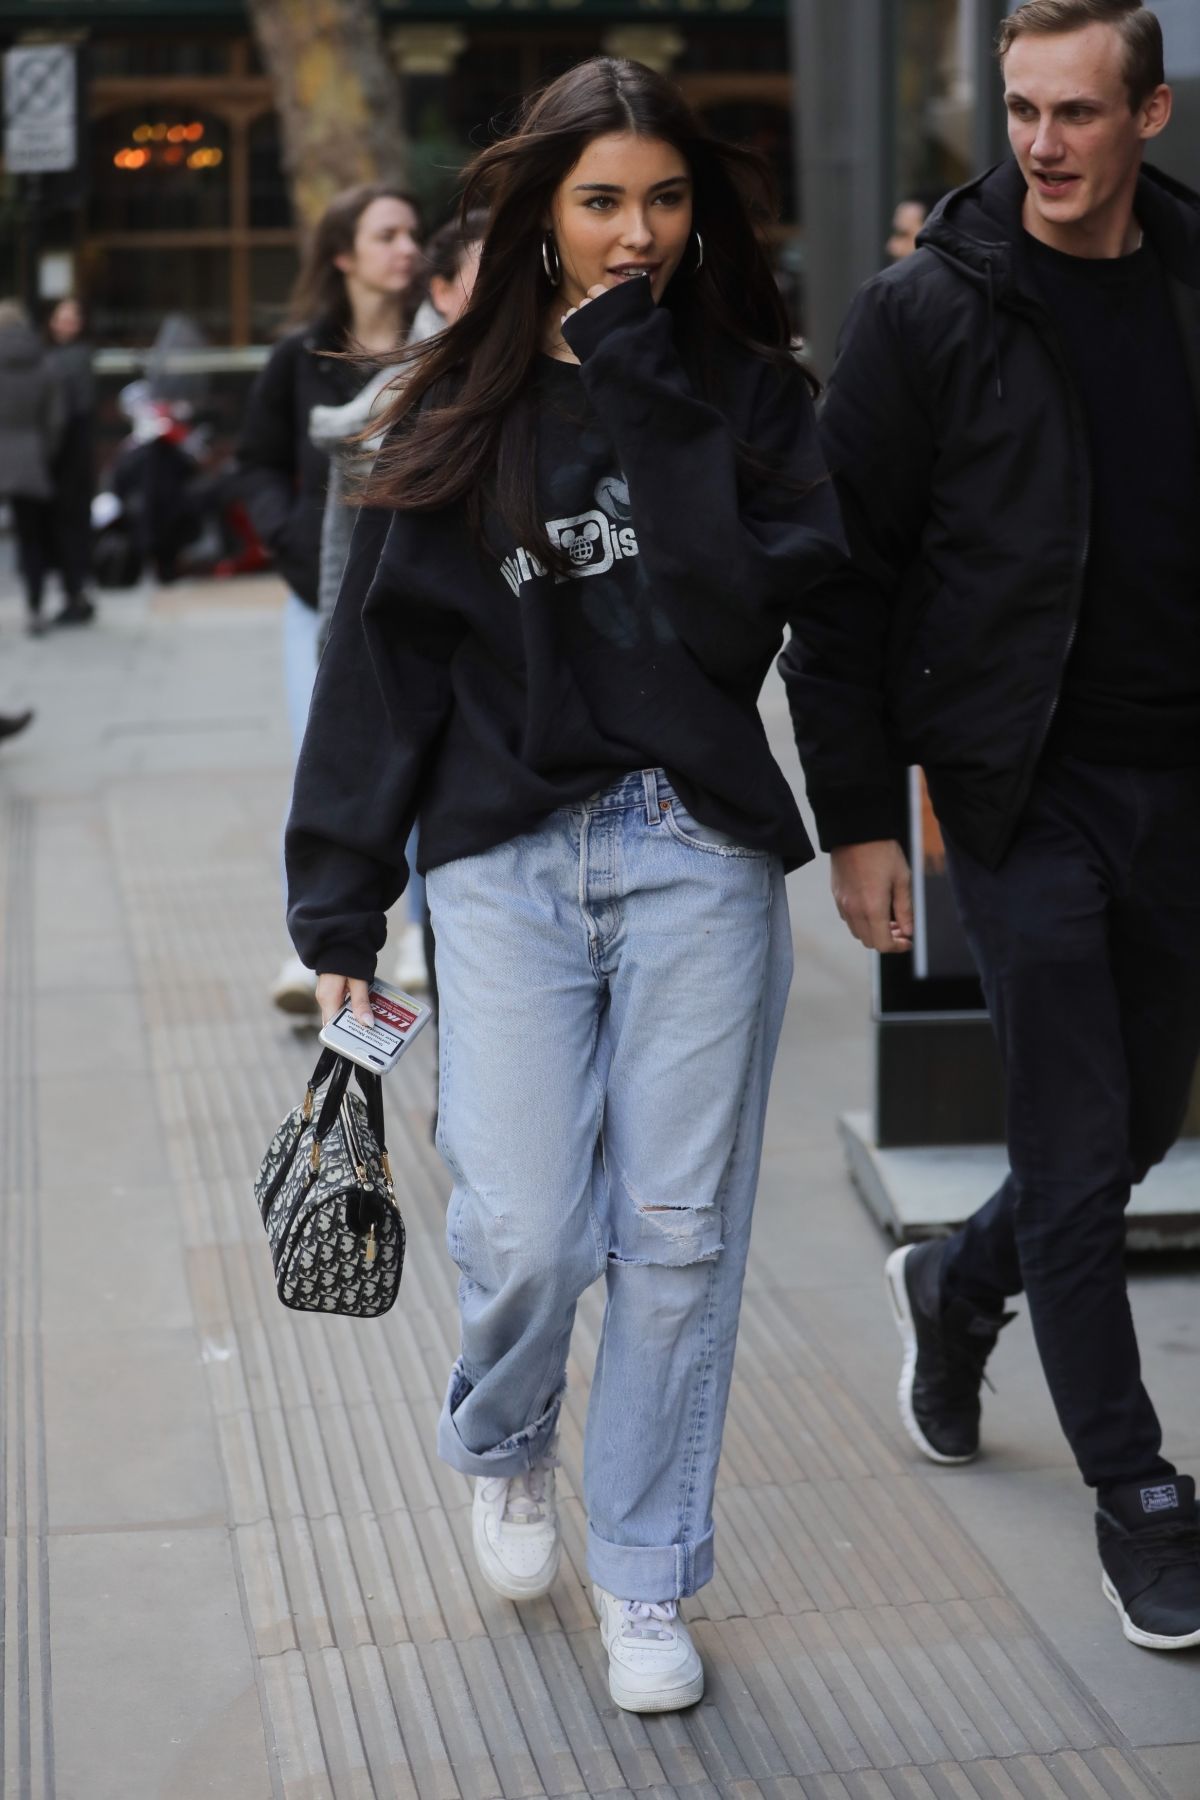 MADISON BEER Arrives at AOL Build Studio in London 02/20/2019 – HawtCelebs